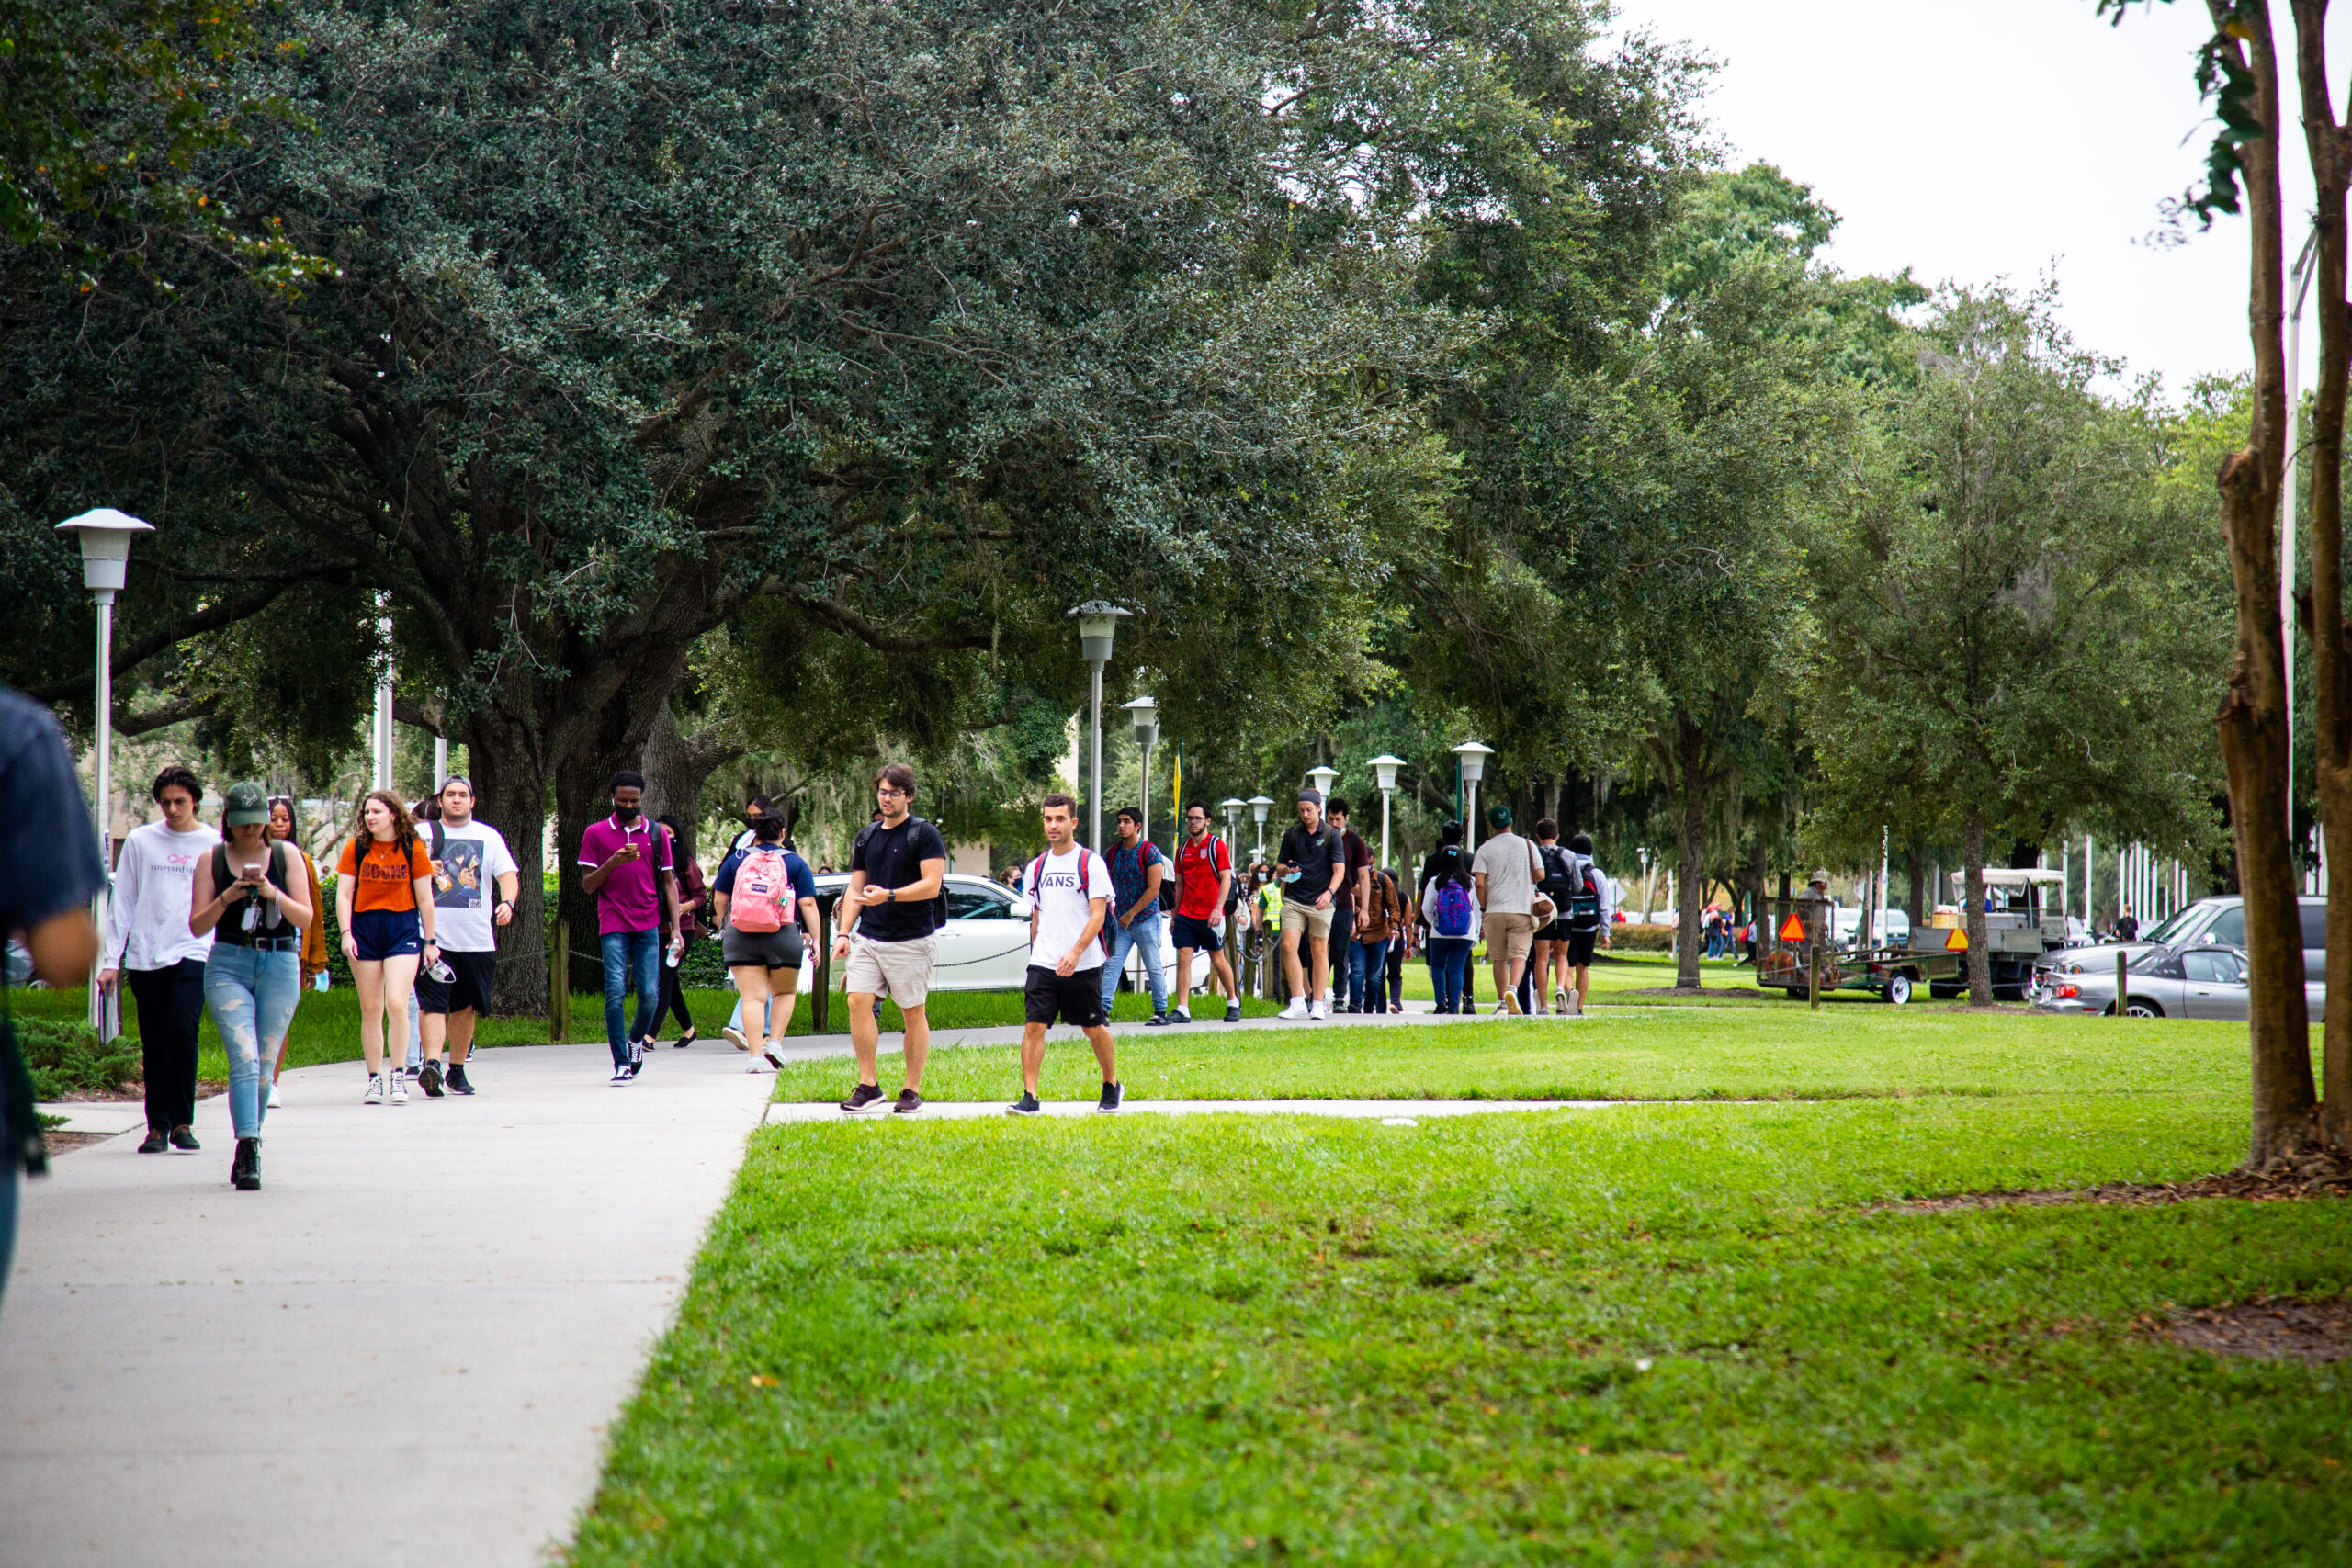 Students express safety concerns in Tampa, on campus picture